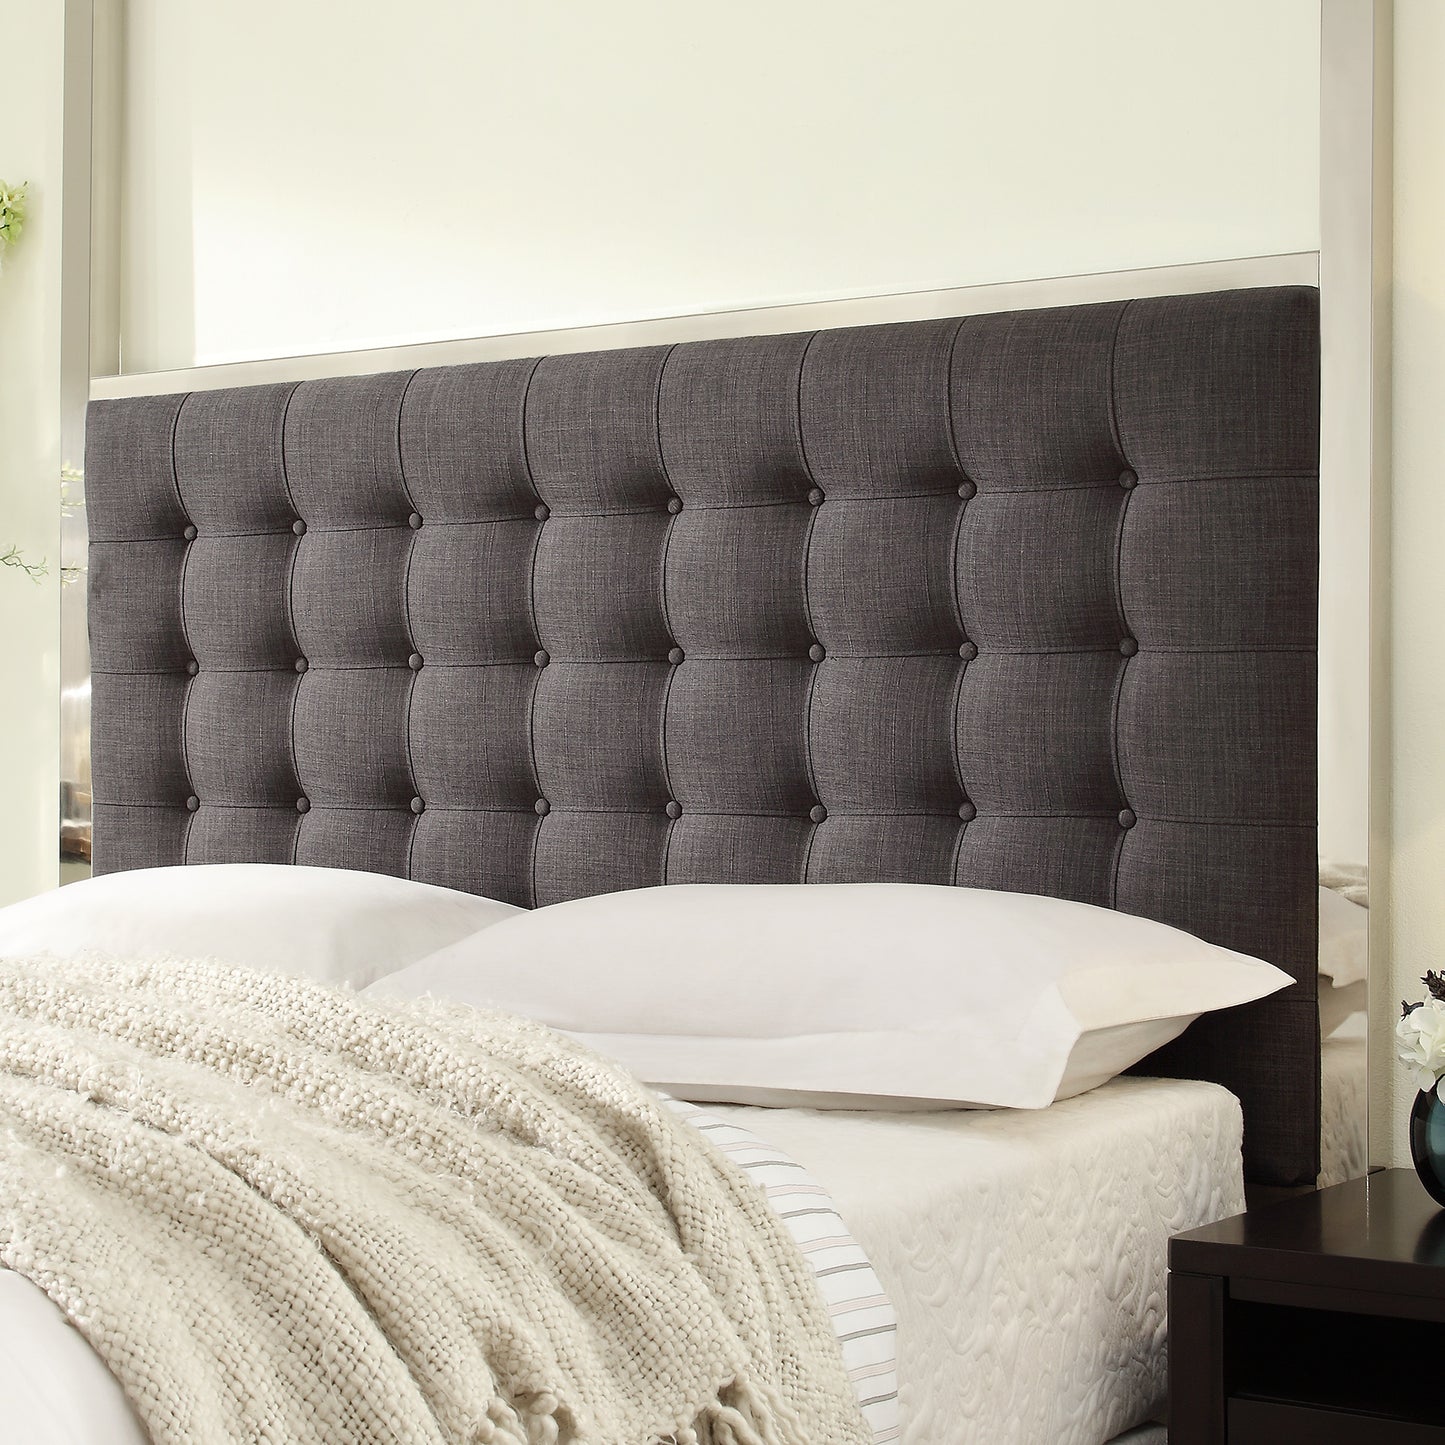 Metal Canopy Bed with Upholstered Headboard - Dark Grey Linen, Chrome Finish, Queen Size